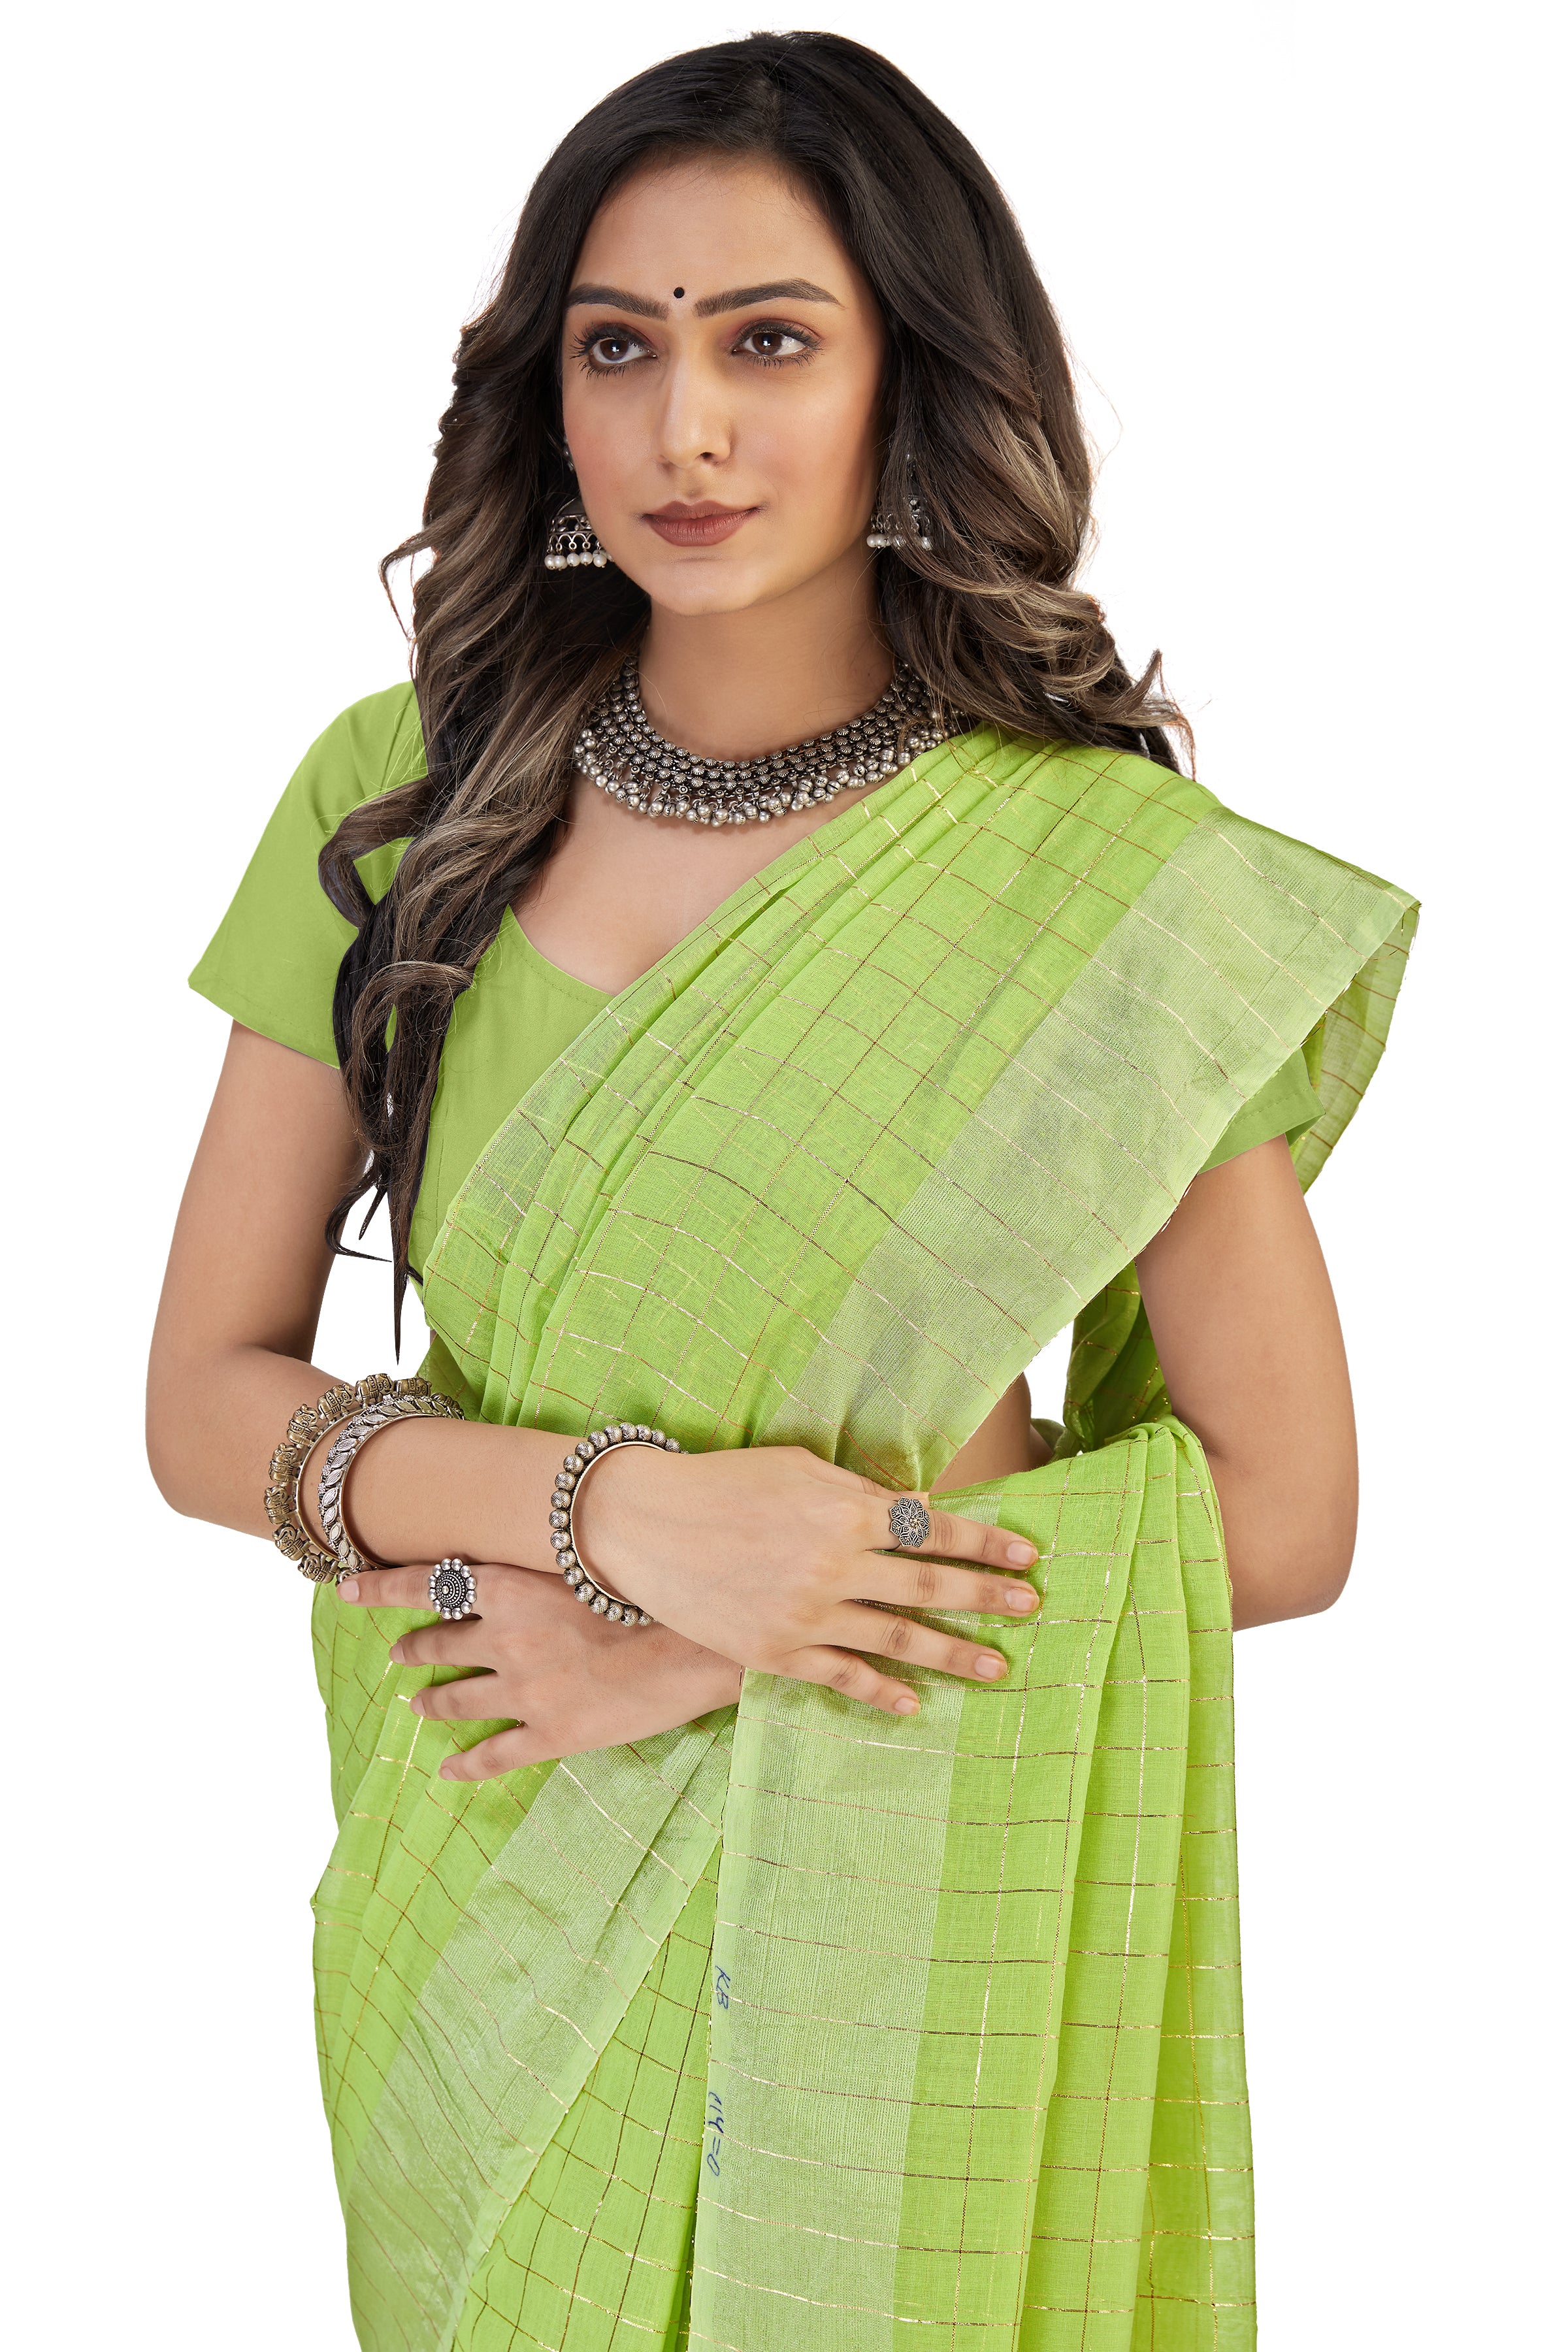 Women's self Woven Checked Daily Wear Cotton Blend Sari With Blouse Piece (Light Green) - NIMIDHYA